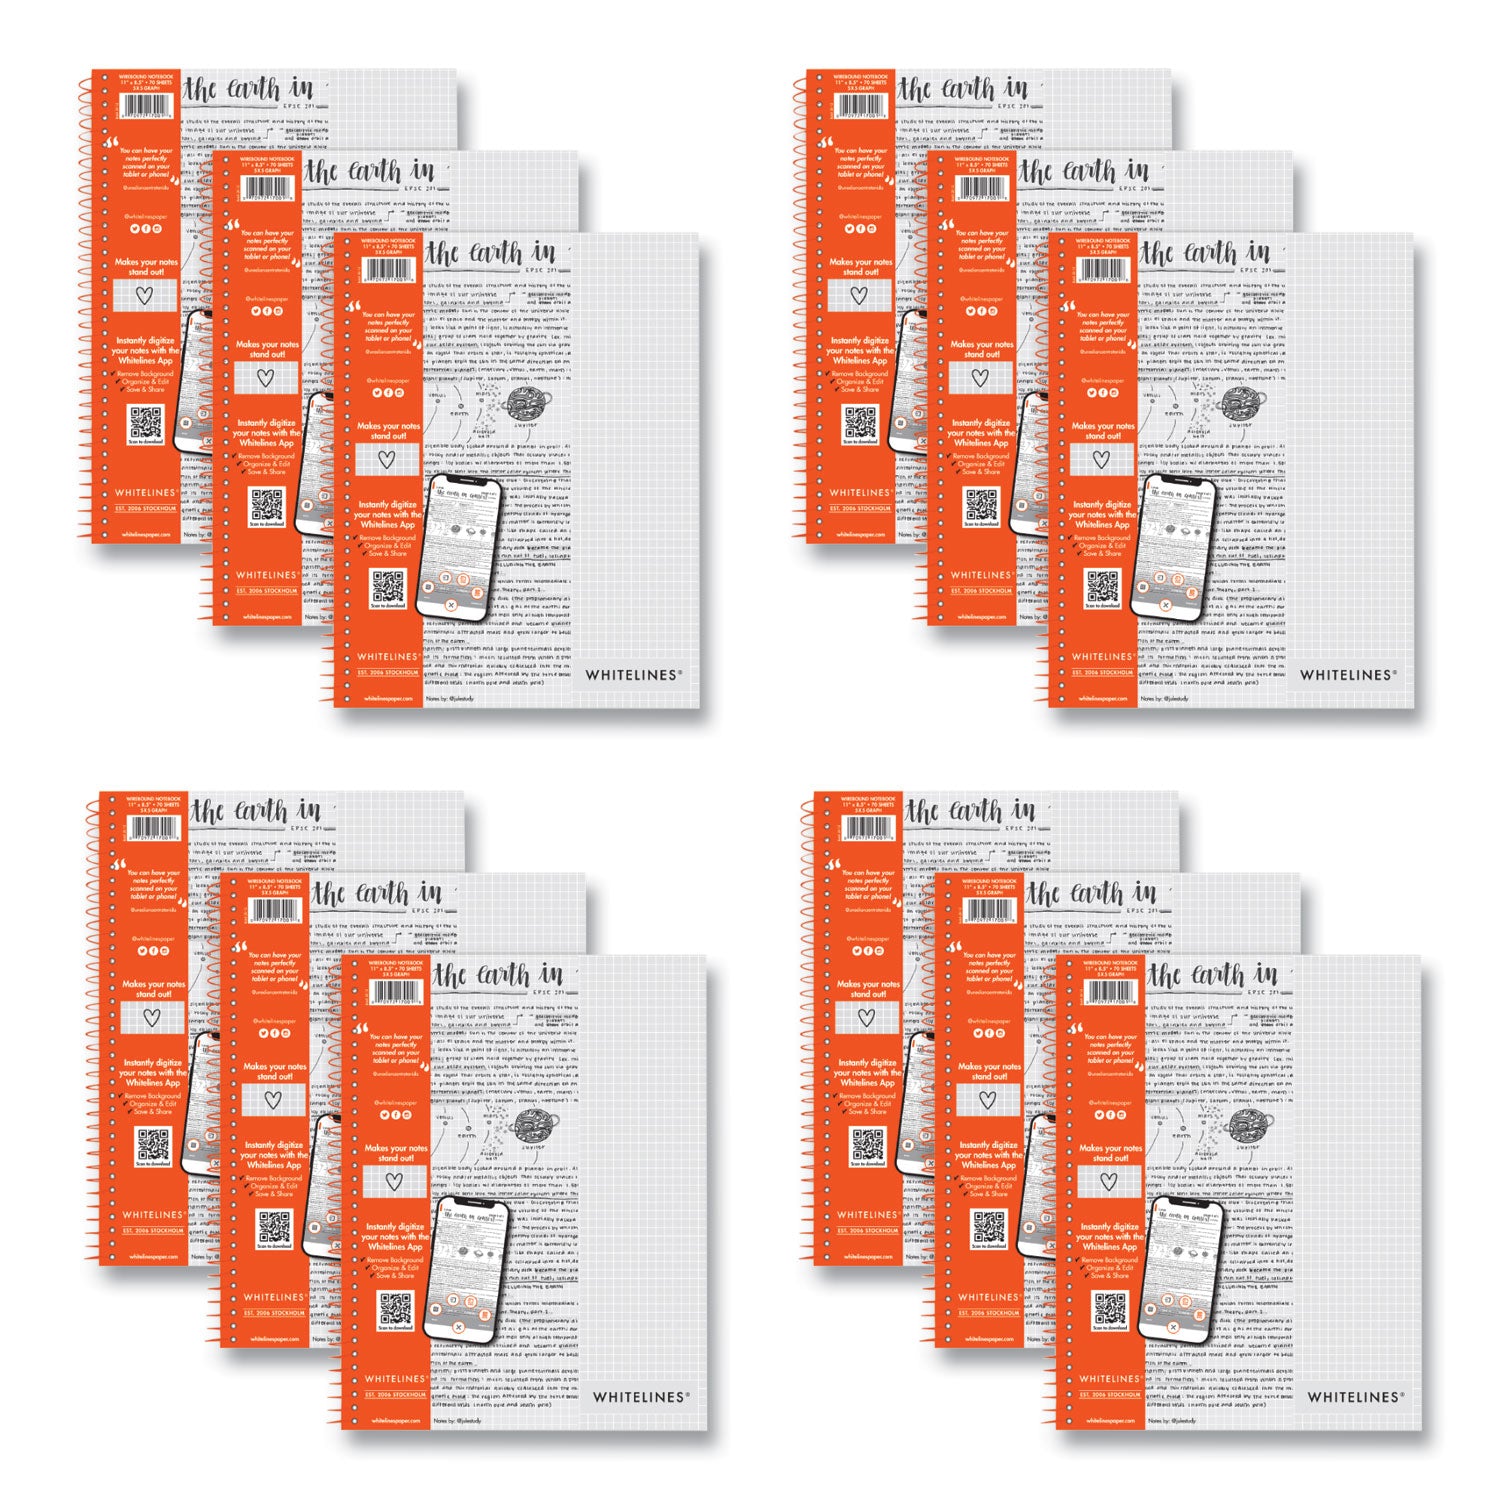 whitelines-notebook-quadrille-rule-5-sq-in-gray-orange-cover-70-11-x-85-sheets-12-ct-ships-in-4-6-business-days_roa17001cs - 1